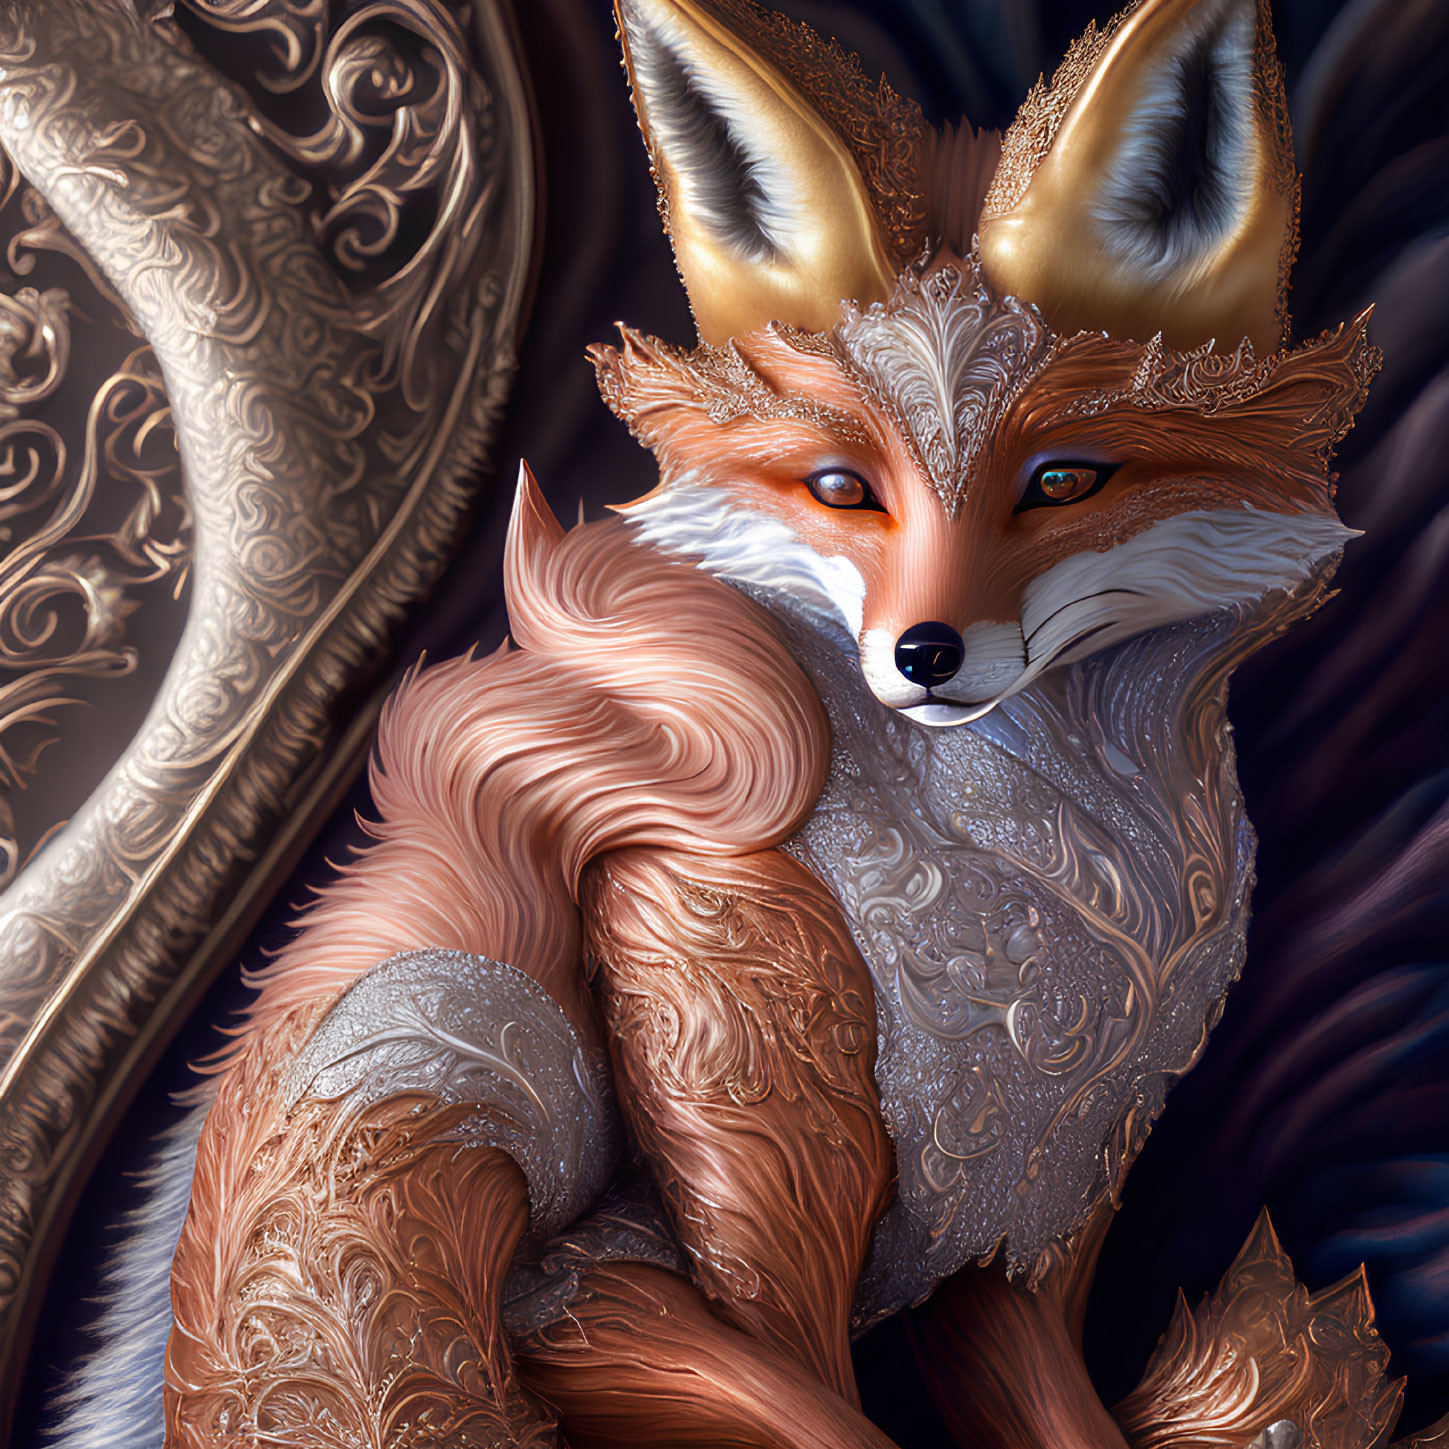 Detailed Anthropomorphic Fox with Ornate Mask and Garment